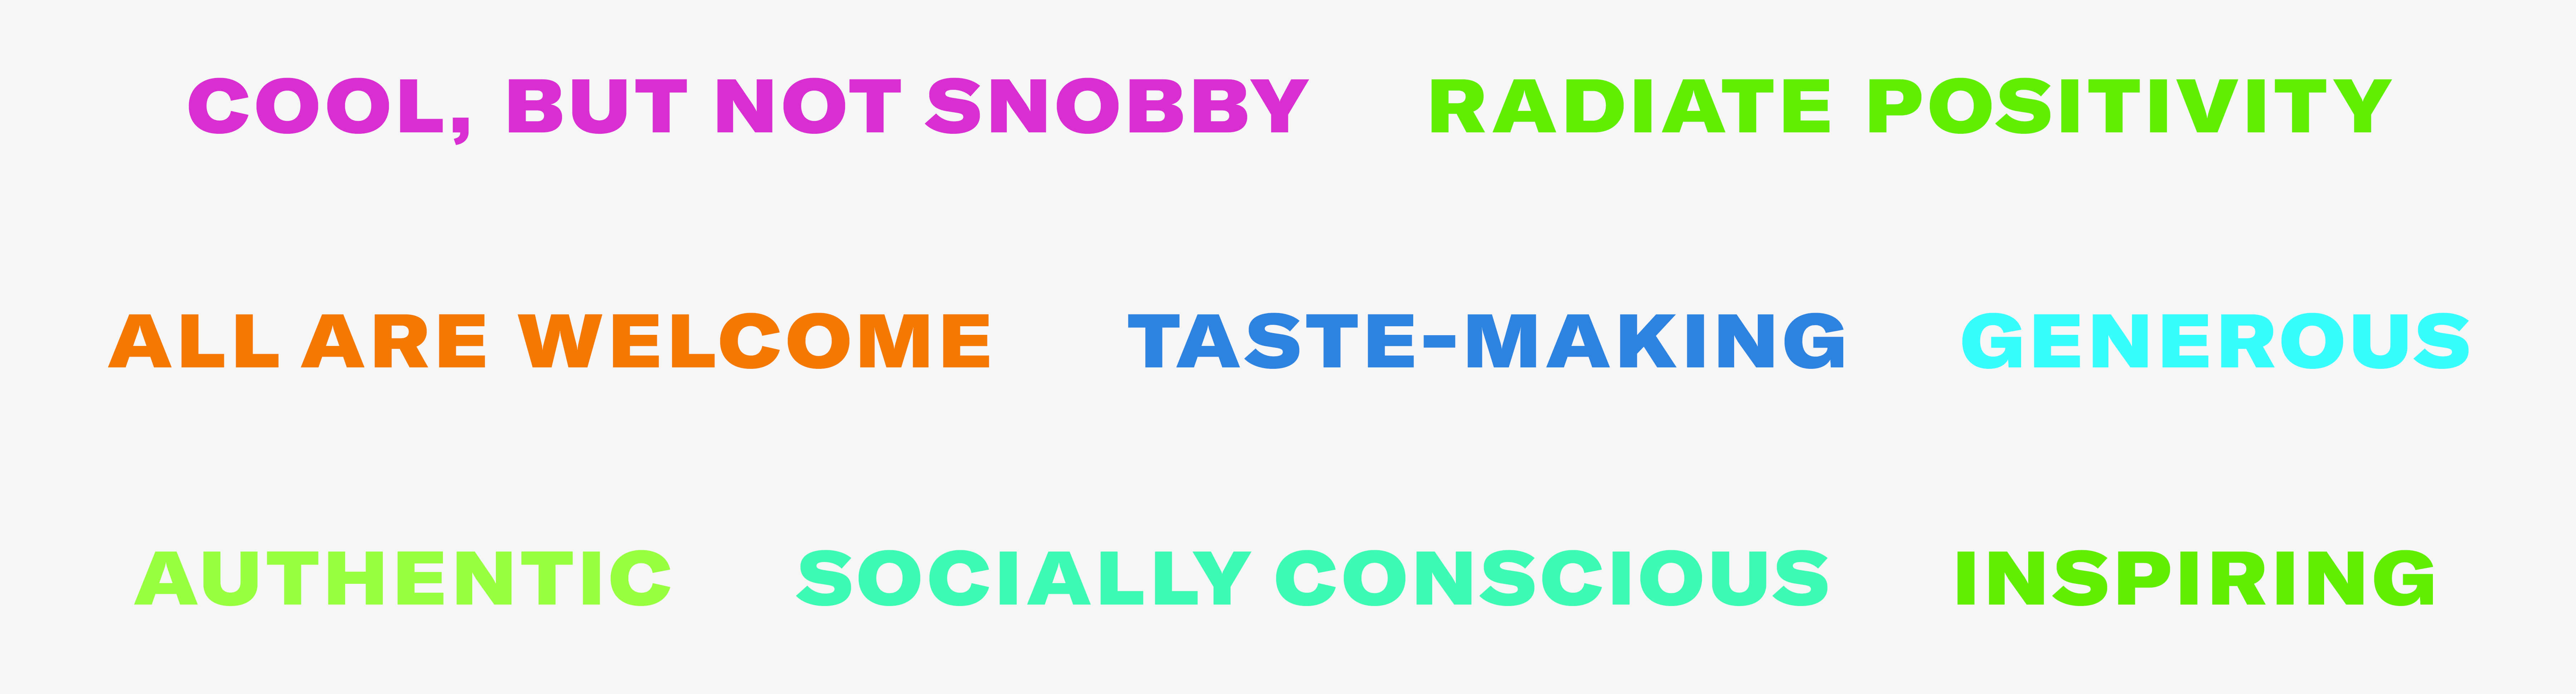 A collection of brand attributes that best describe the essence of Bonnaroo. Cool, but not snobby. Radiate positivity. All are welcome. Taste-making. Generous. Authentic. Socially conscious. Inspiring.